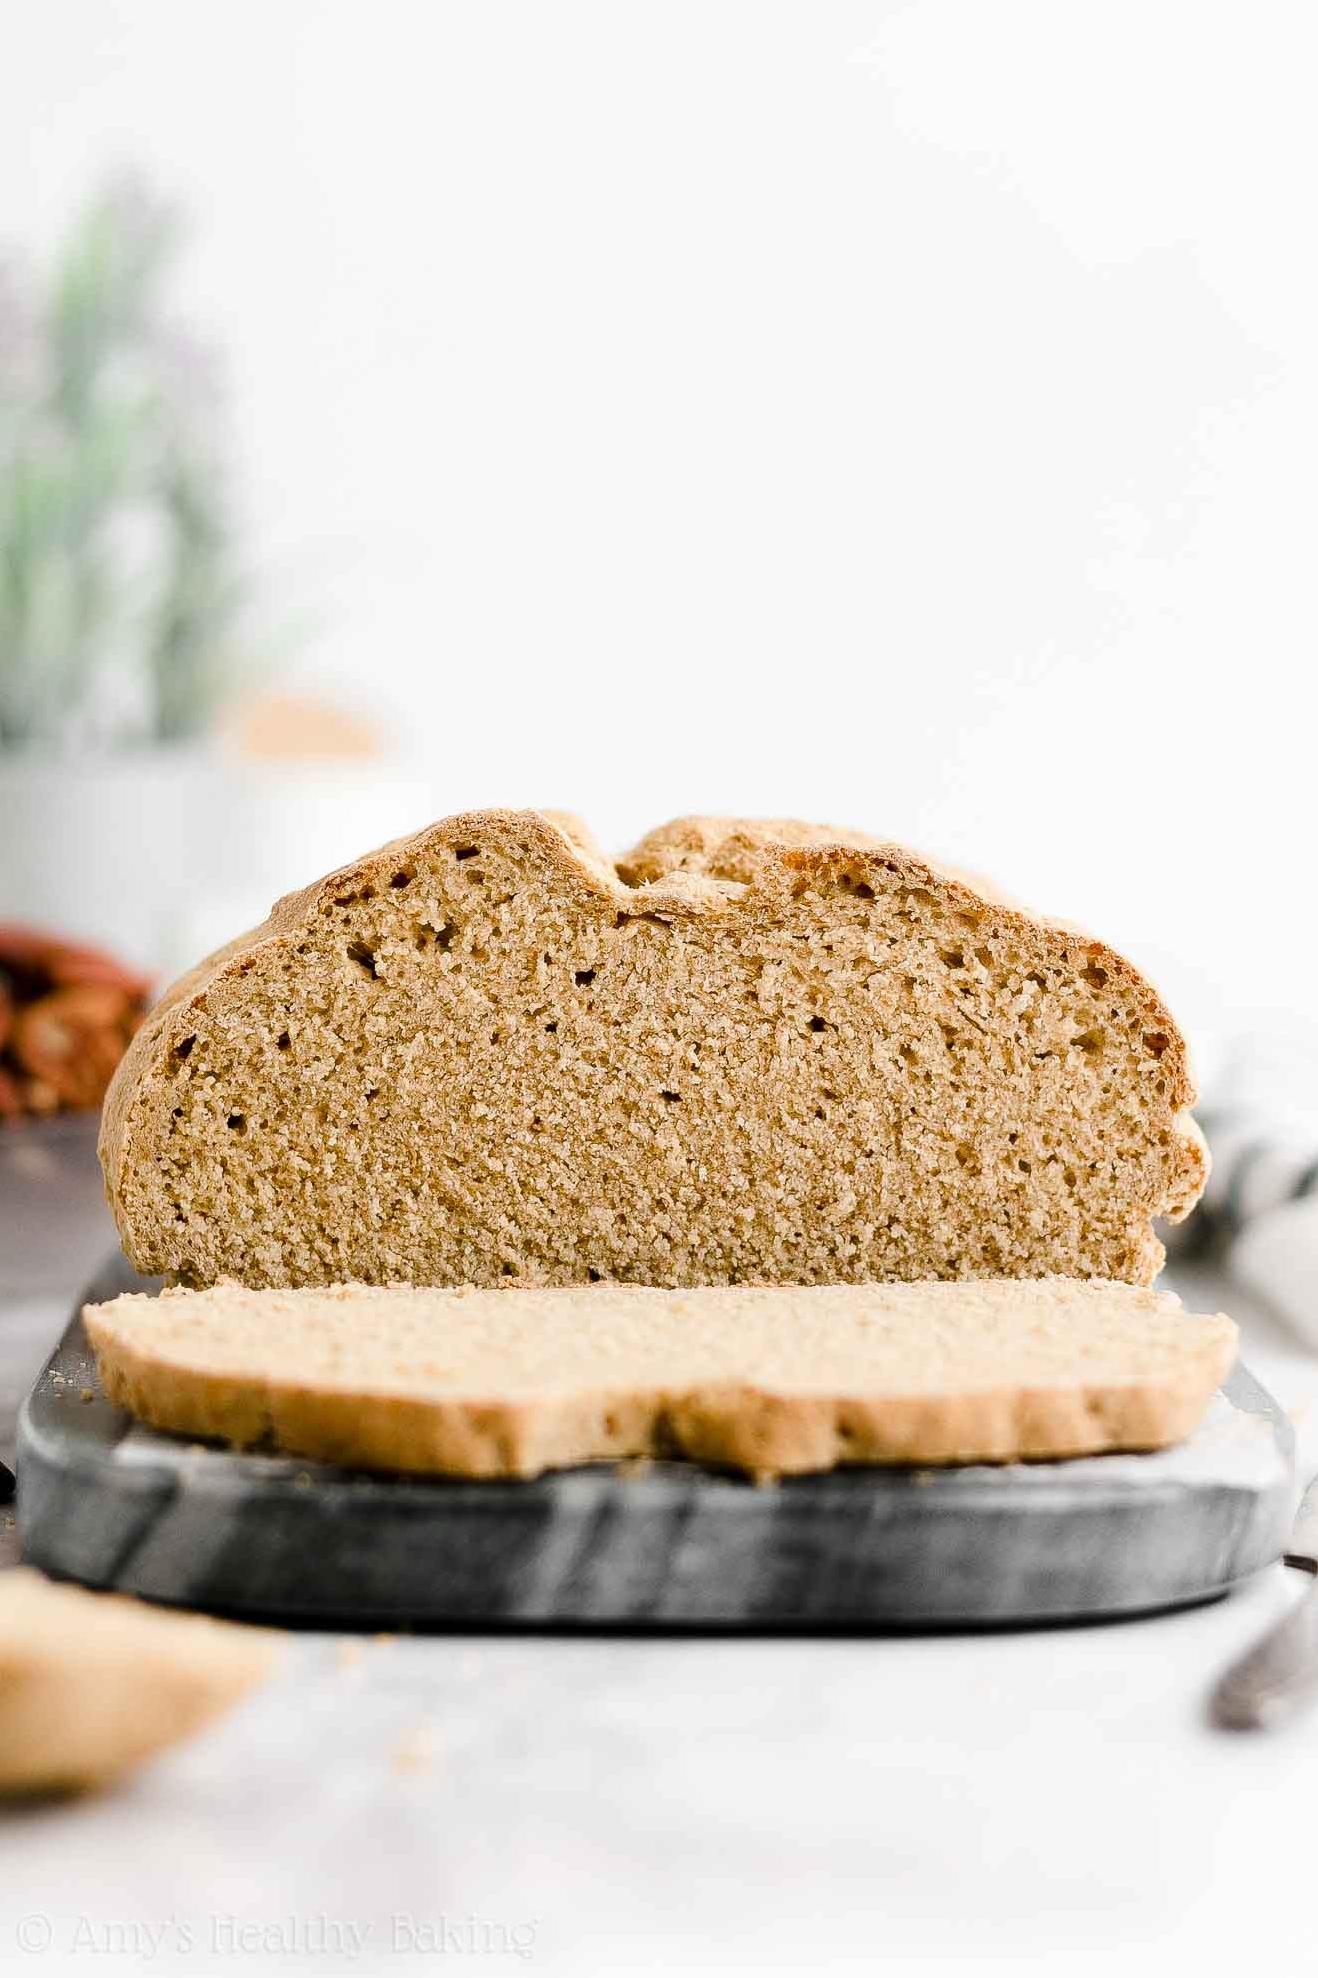  Want to know the secret behind this Irish soda bread recipe for health nuts?